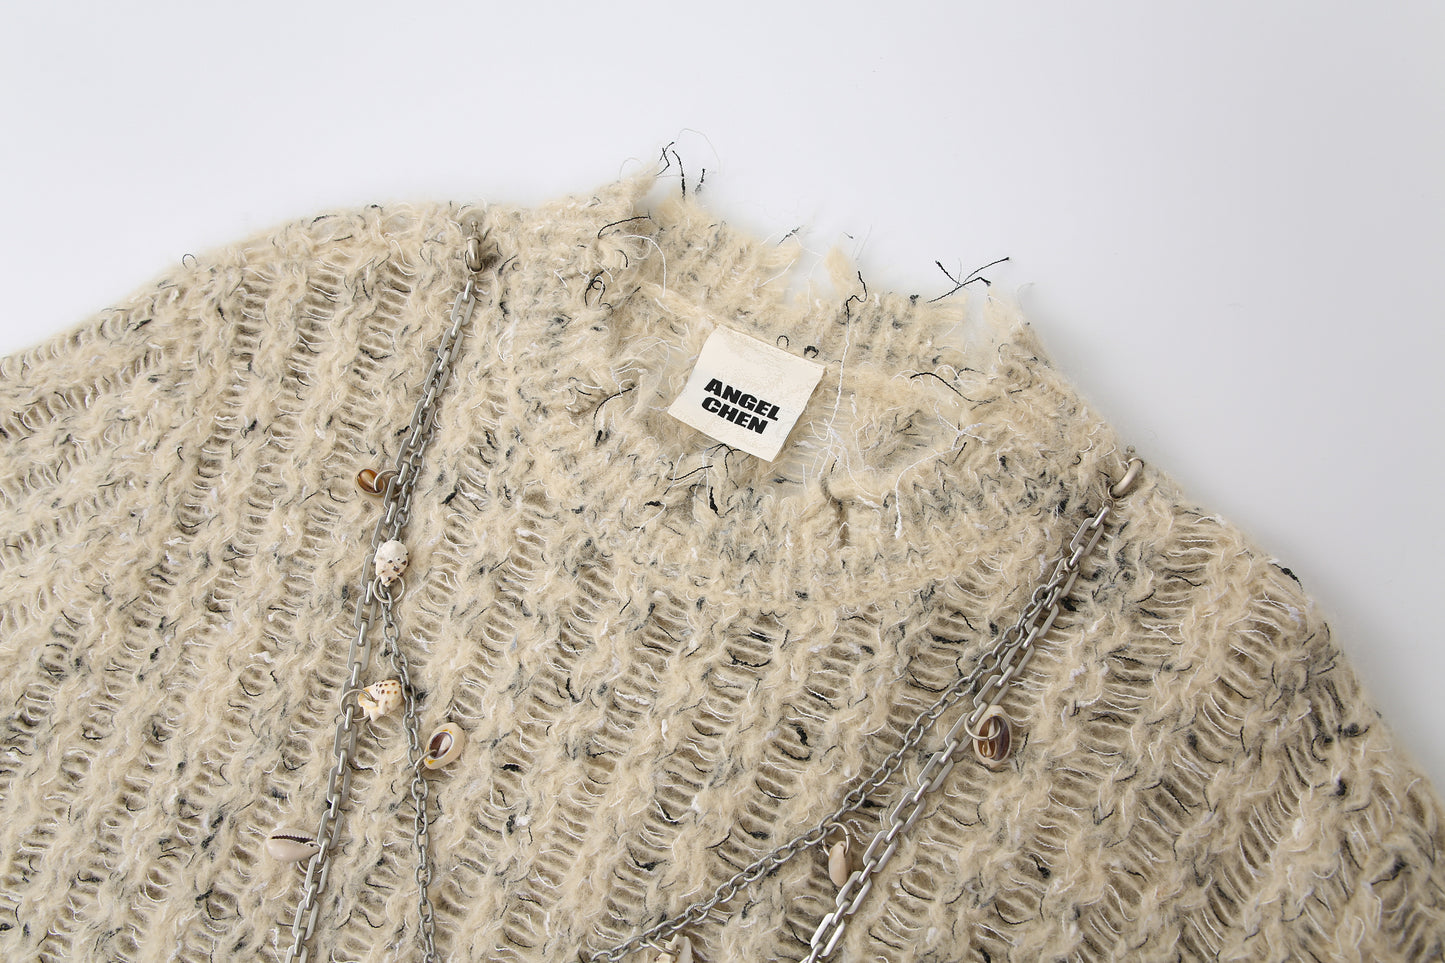 OPEN KNIT SWEATER WITH NECKLACE CREAM